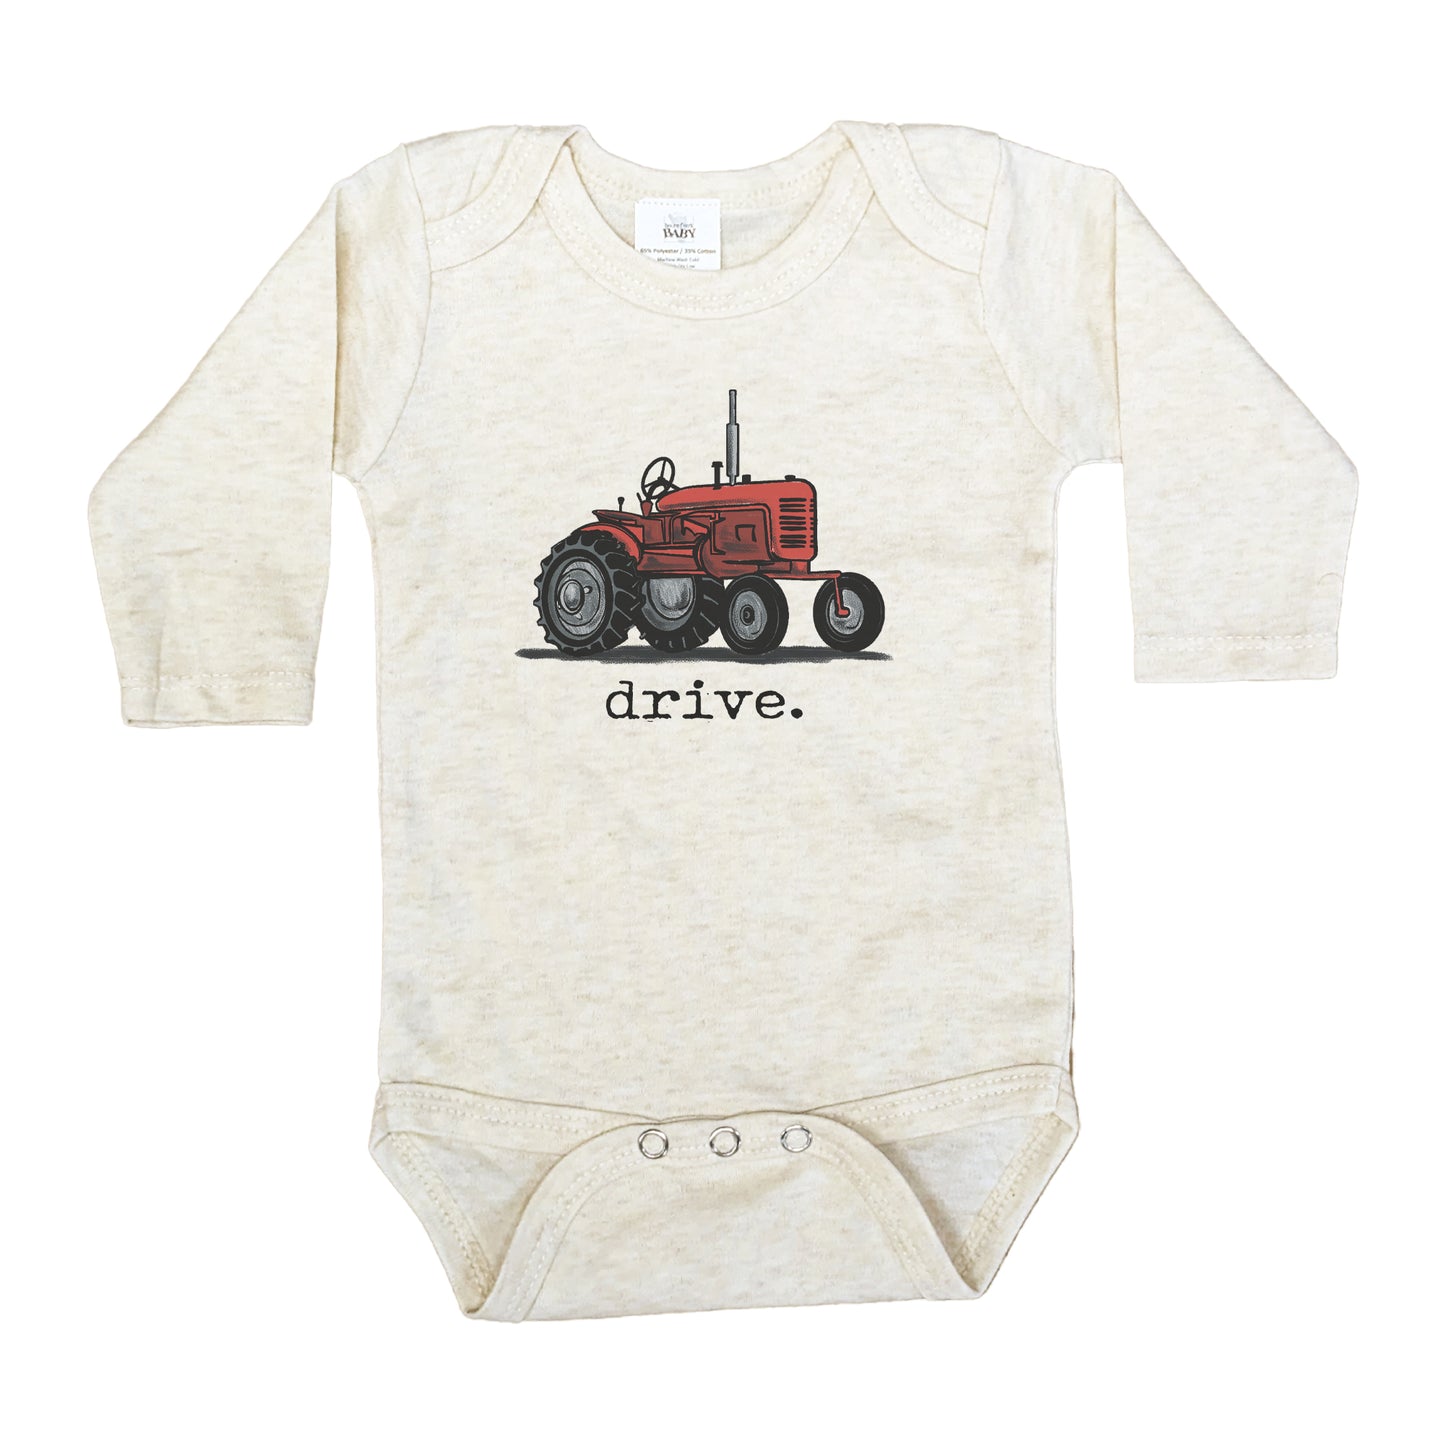 "Drive" Red Tractor Beige Baby Body suit